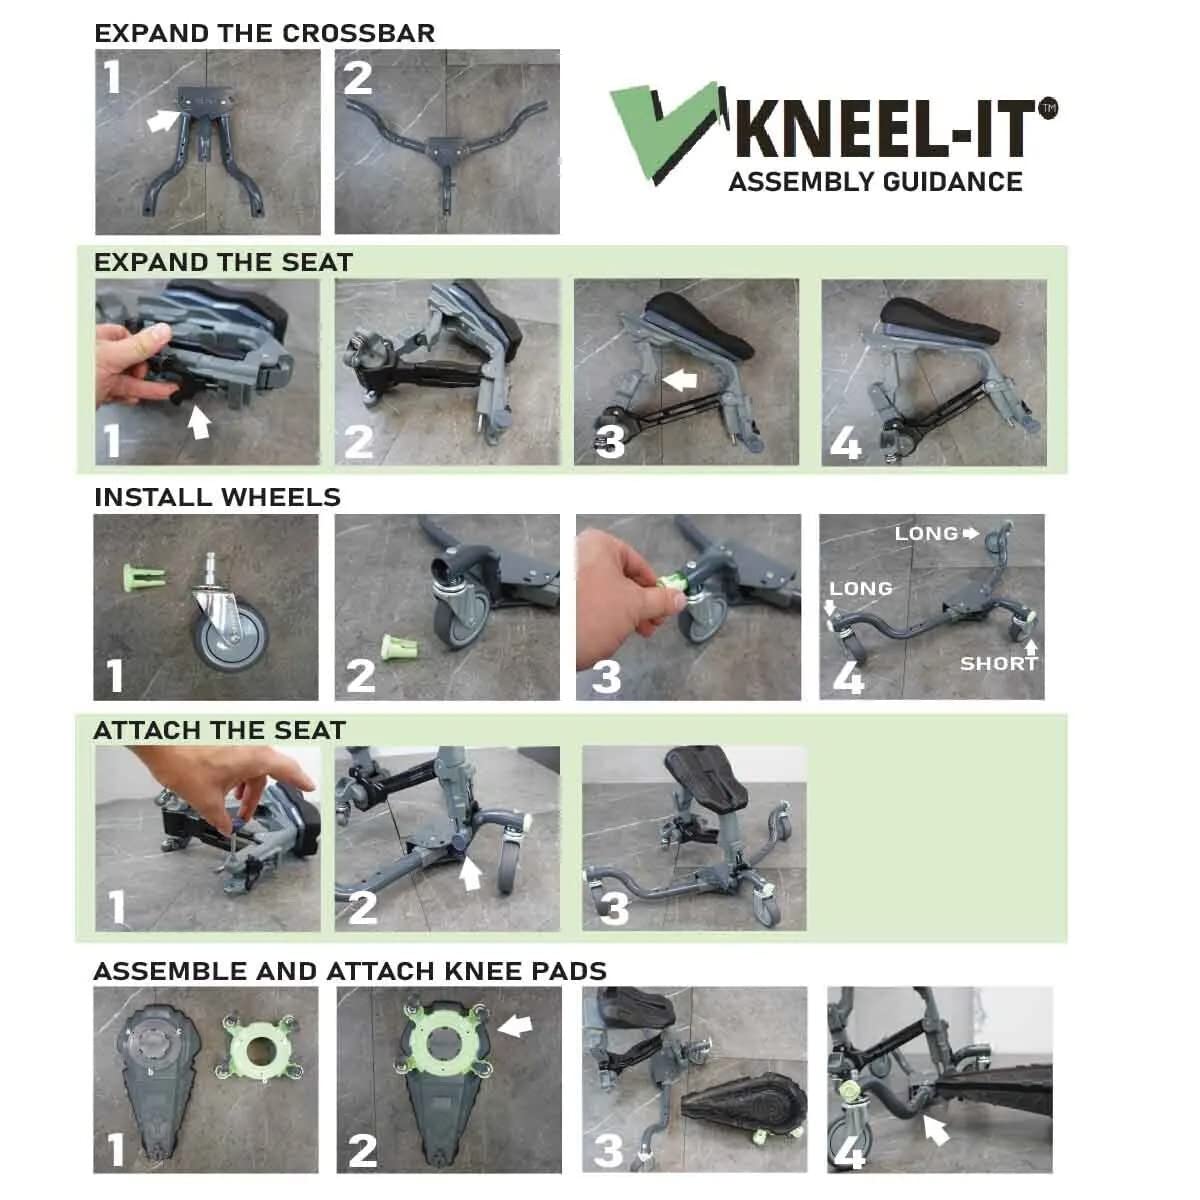 Kneel-It V3 Rolling Knee Pads - Durable Ergonomic Mobile Knee Pads with Seat - 360° Turning Capability, Supports 360 lbs, Compactable, Optimal for any Floor Job